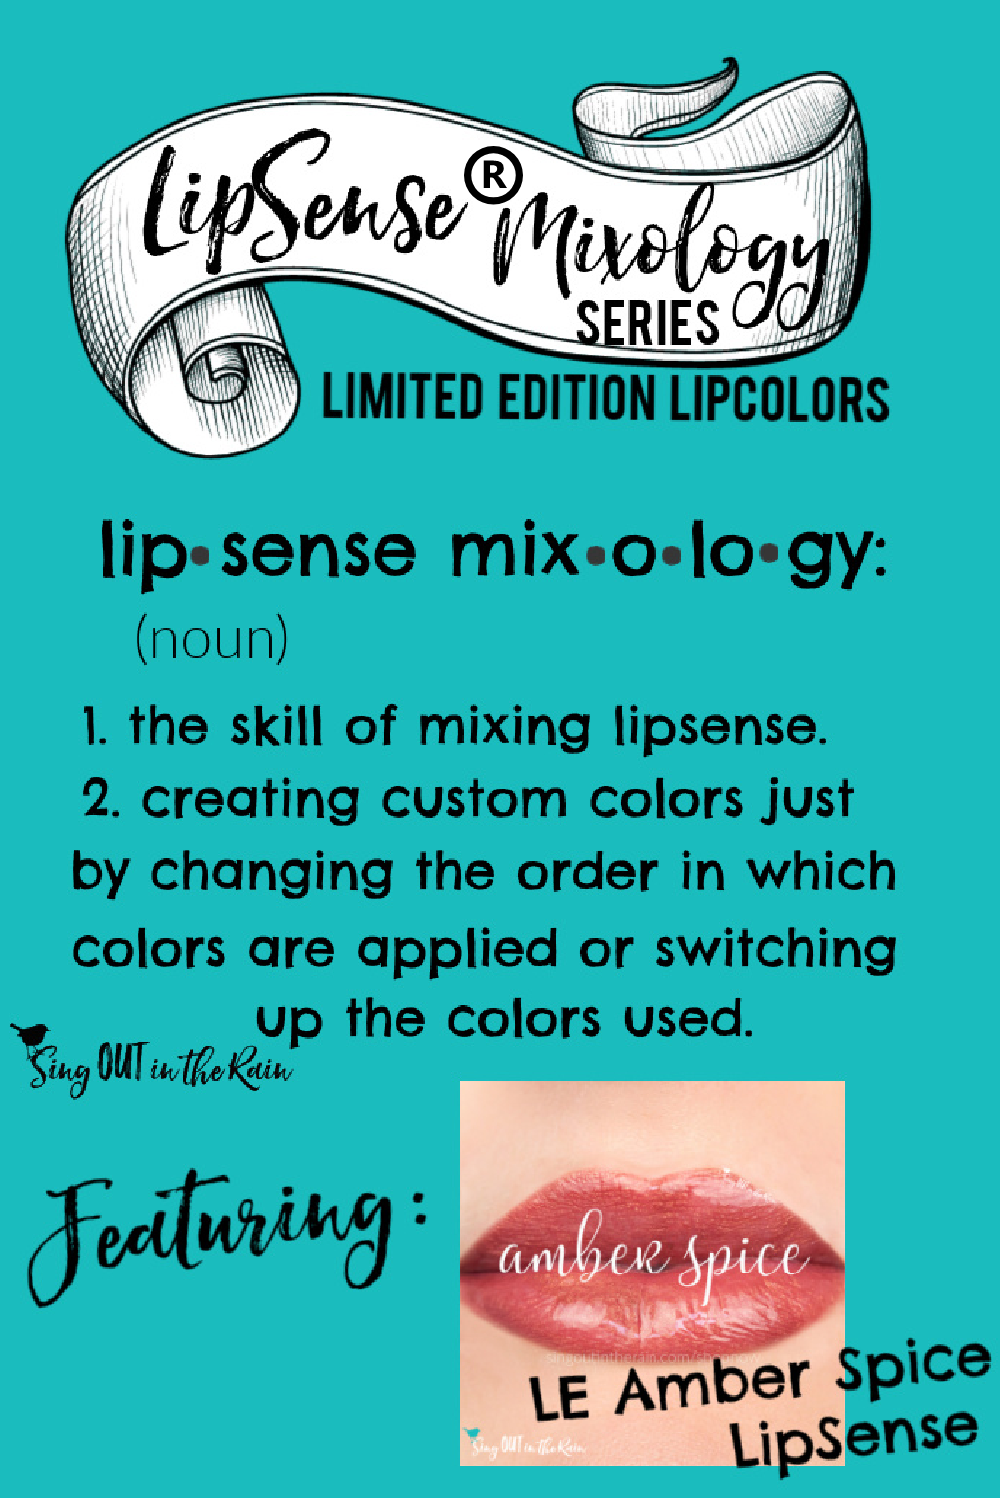 The Ultimate Guide to Amber Spice LipSense Mixology